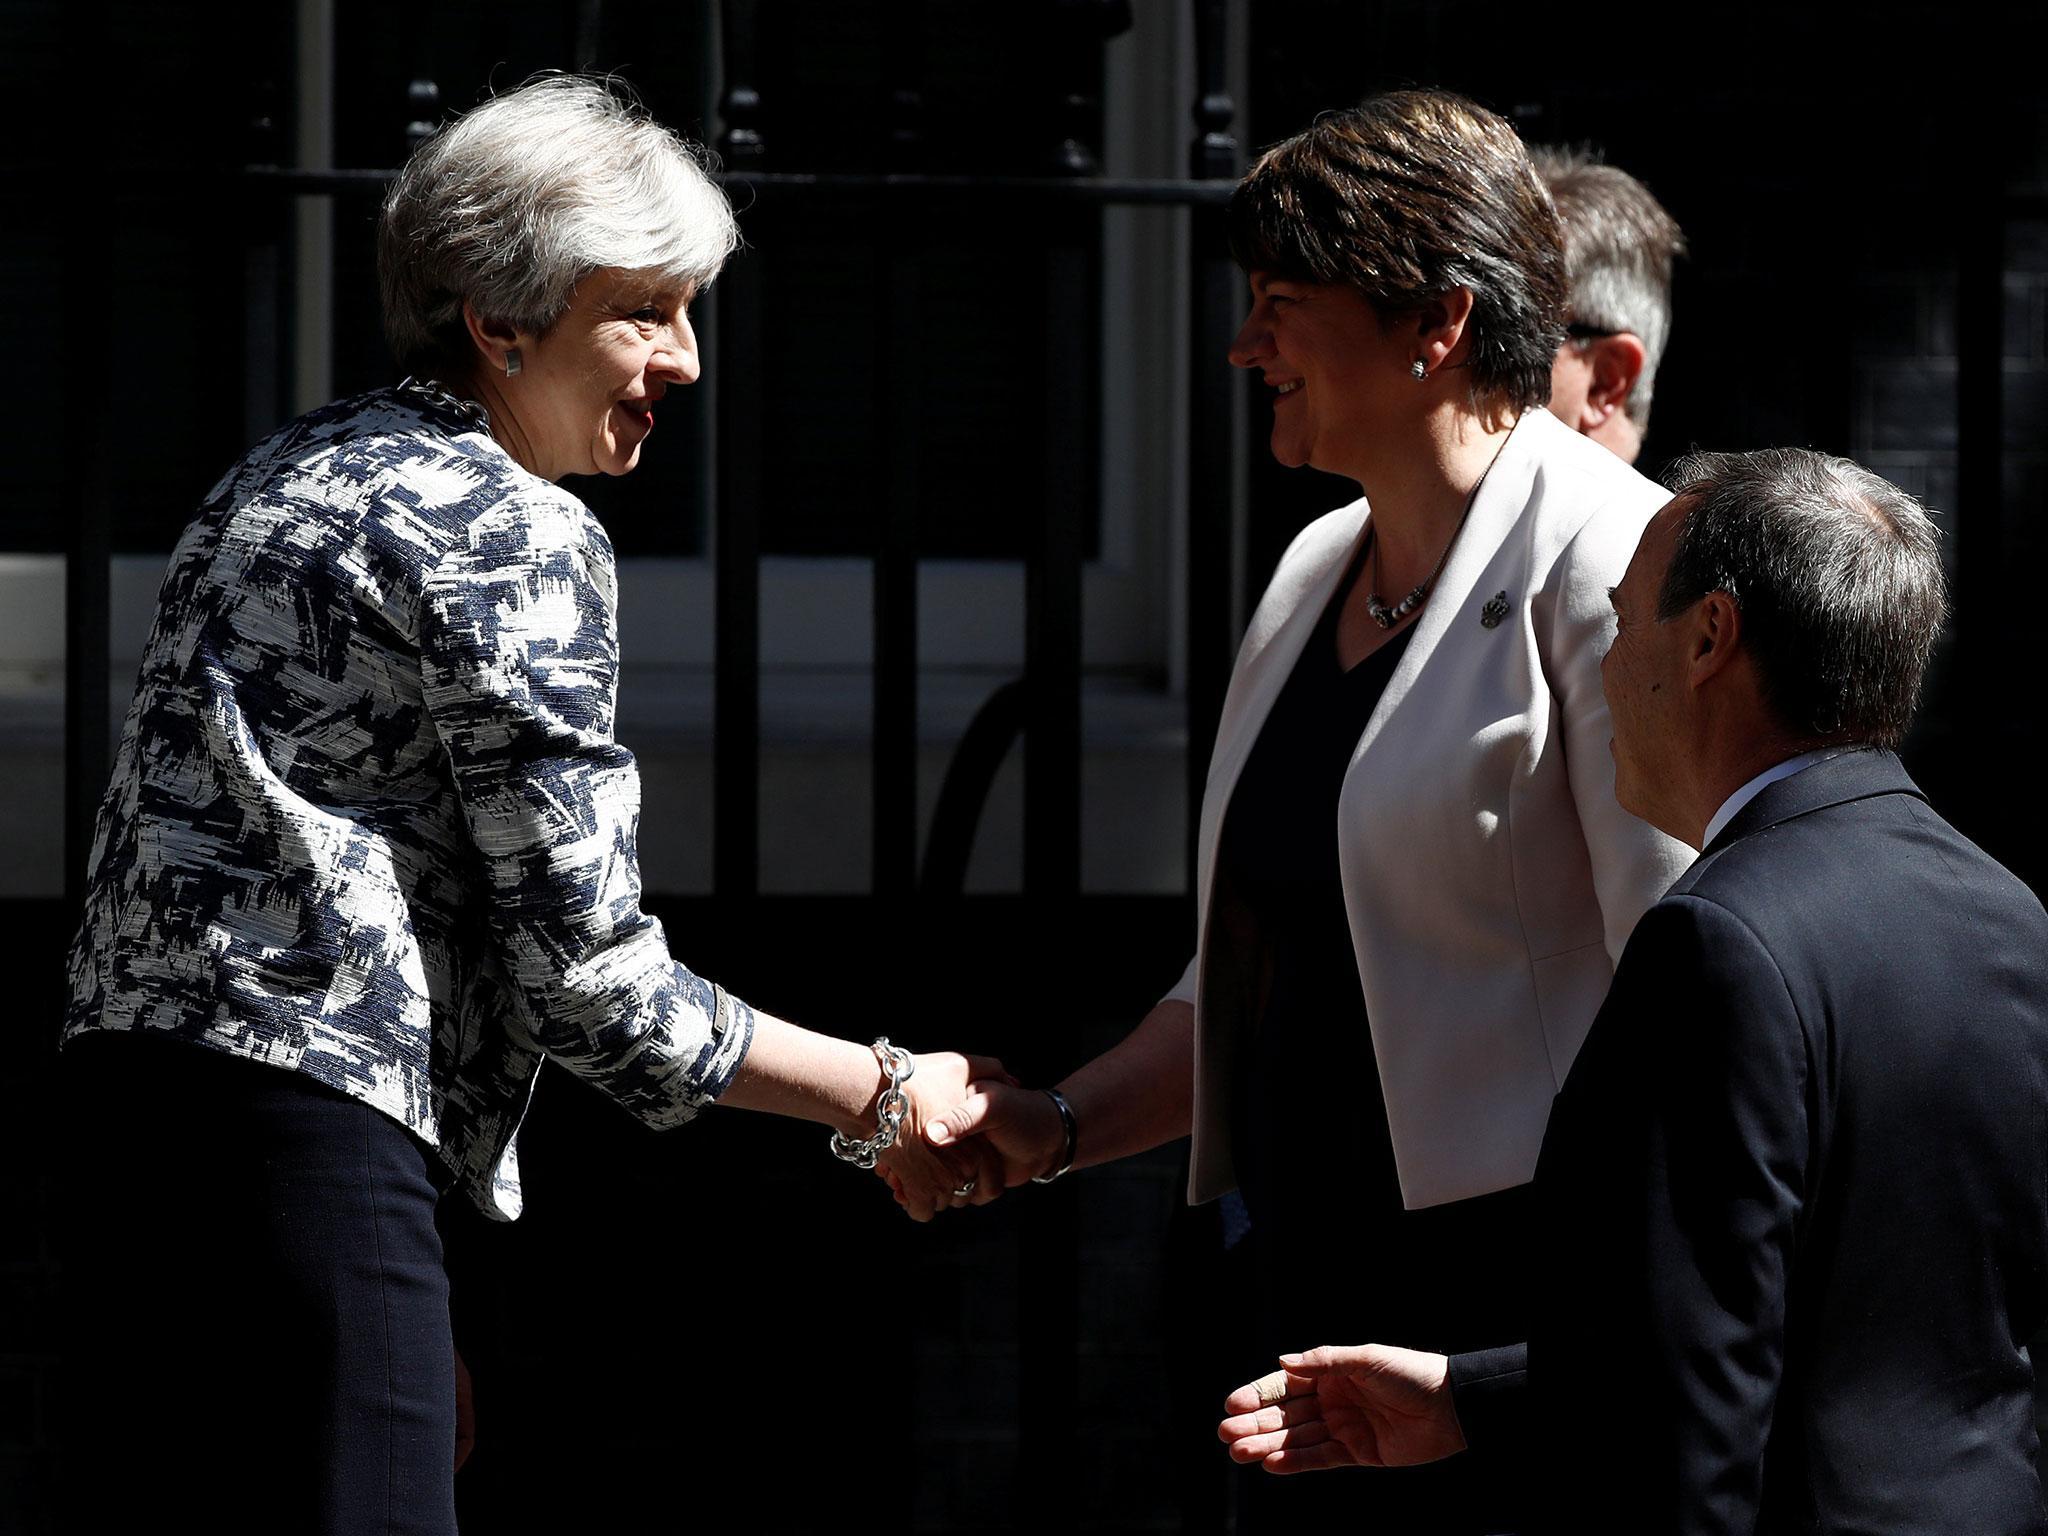 Theresa May and Arlene Foster, the DUP leader, shake hands after signing their deal in June